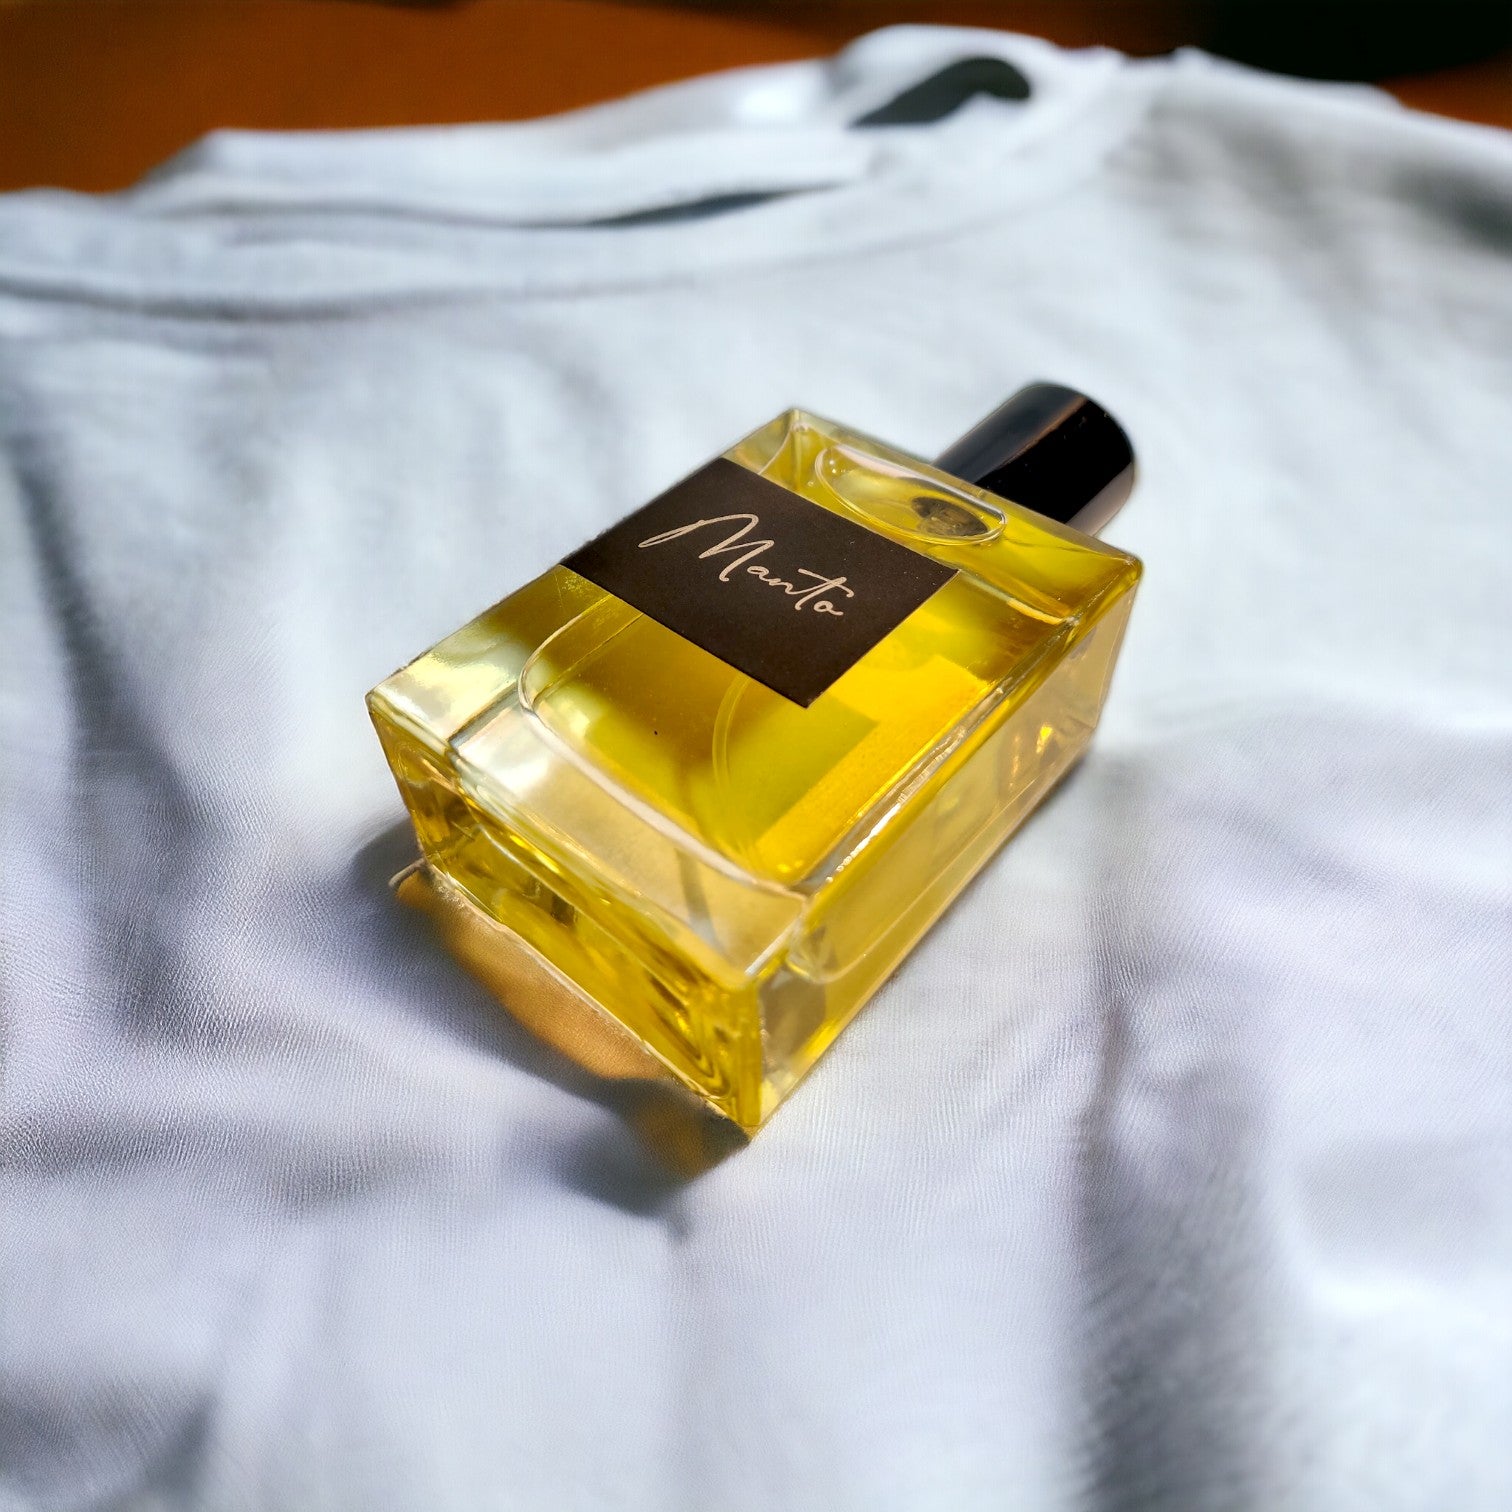 Manto For Him - 50ml | Nearest Match to Bracken Man by Amouage | Scent You